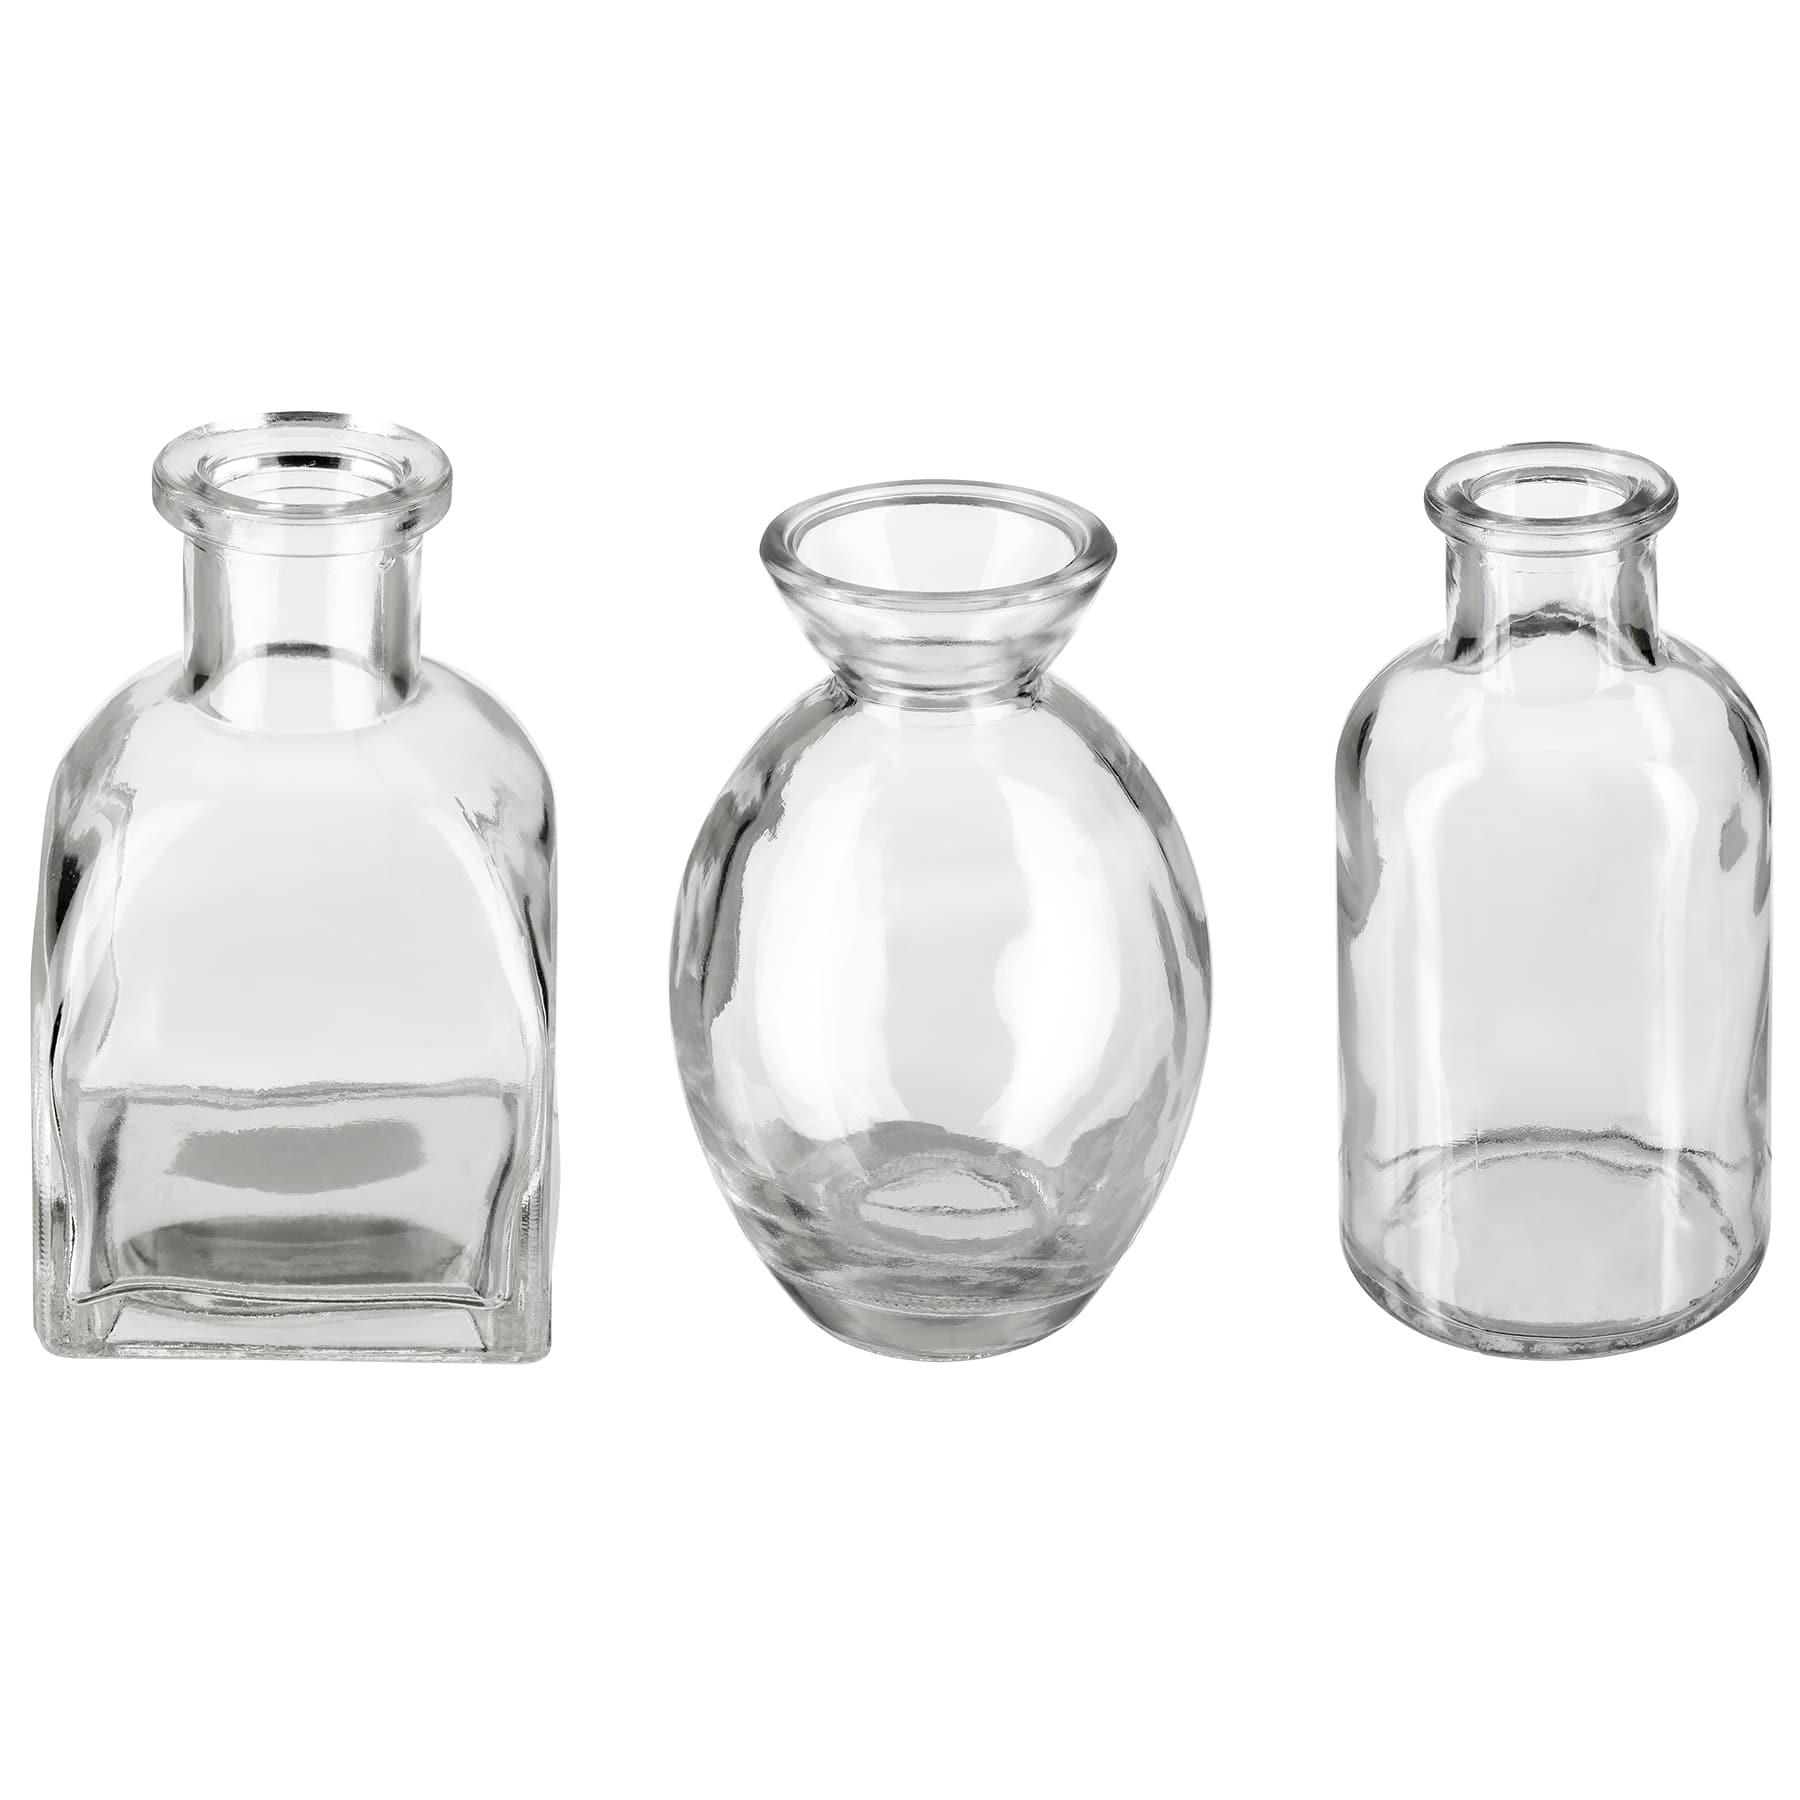 6 Packs: 12 ct. (72 total) Mixed Wedding Favor Glass Vases by Celebrate It&#x2122;